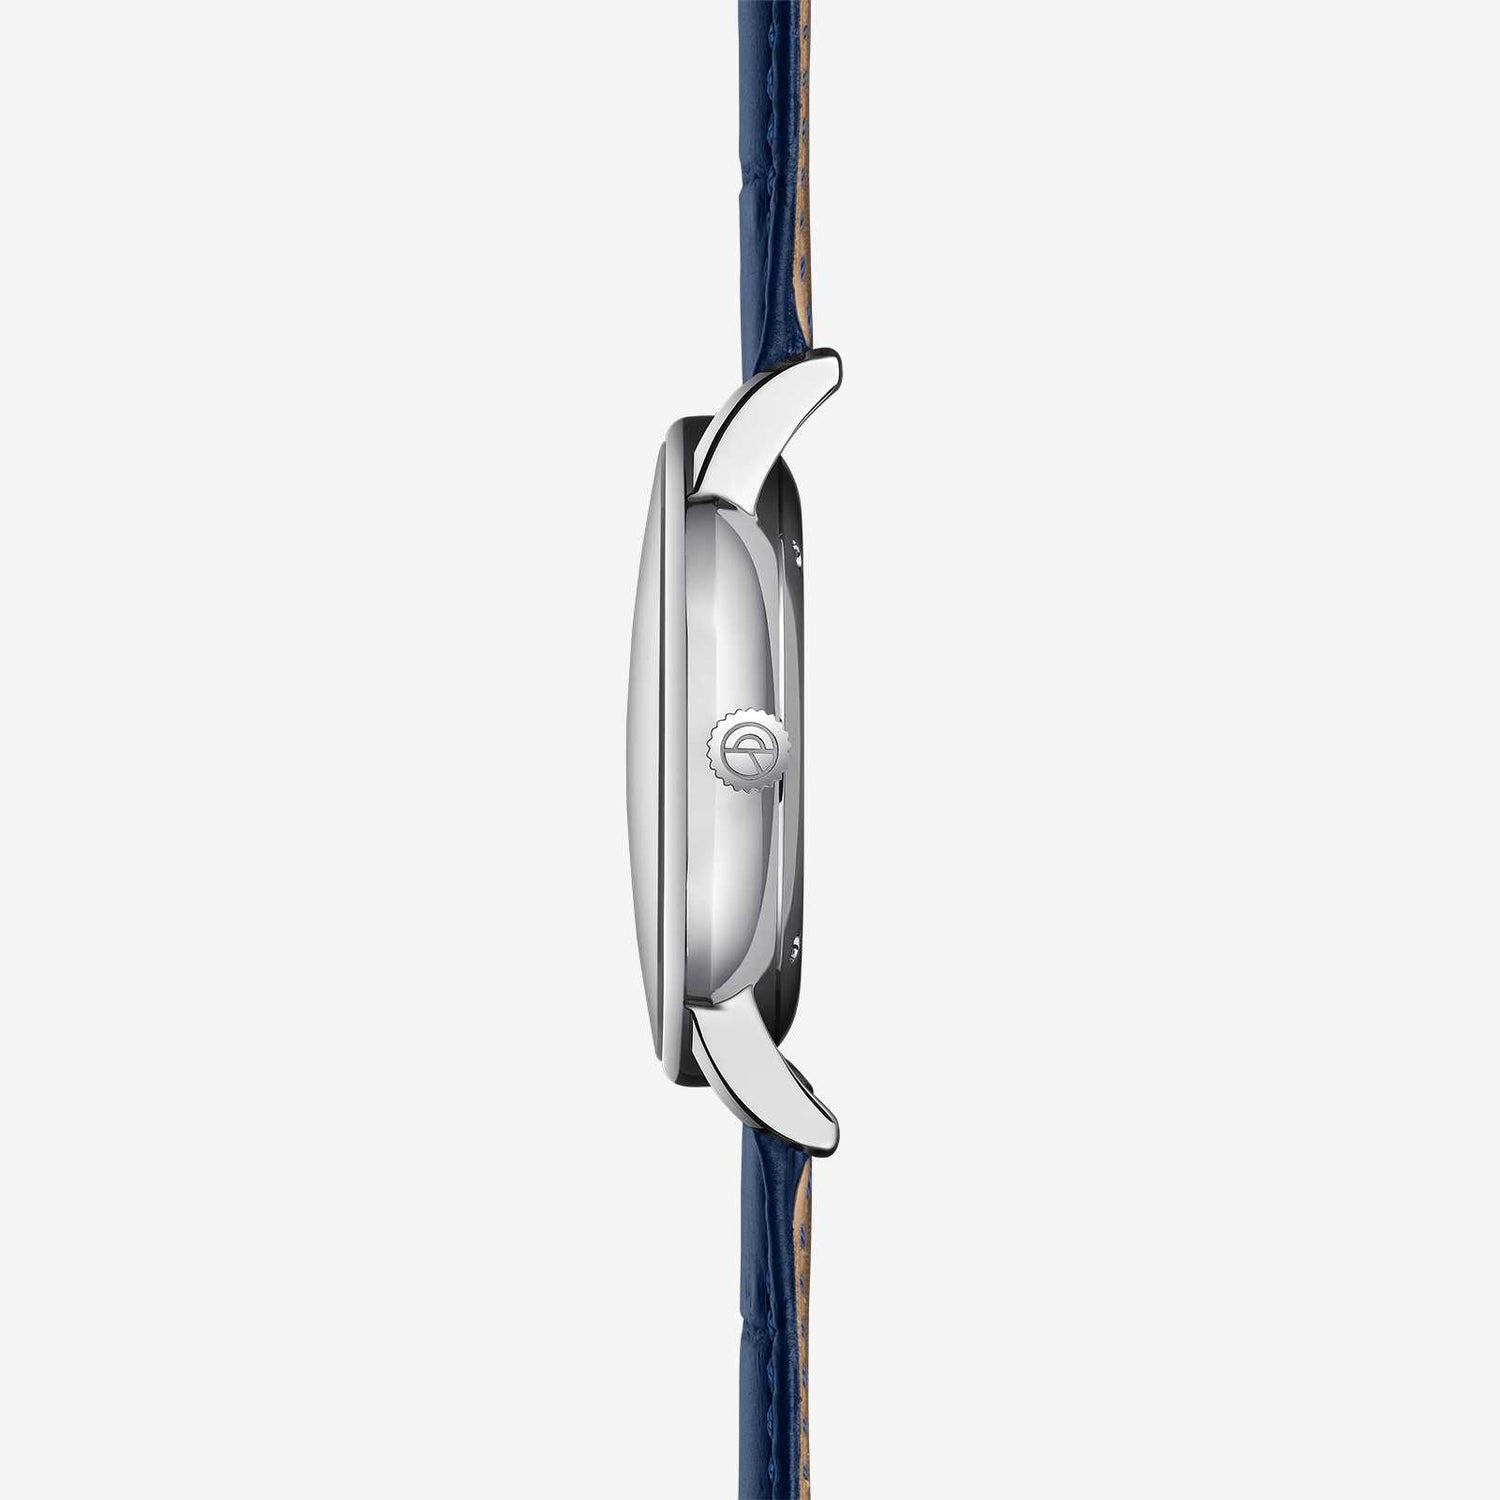 popup|Scratch-resistant sapphire crystal|The finely curved and double anti-reflective sapphire crystal ensures a clear view - the premium class of watch crystals.